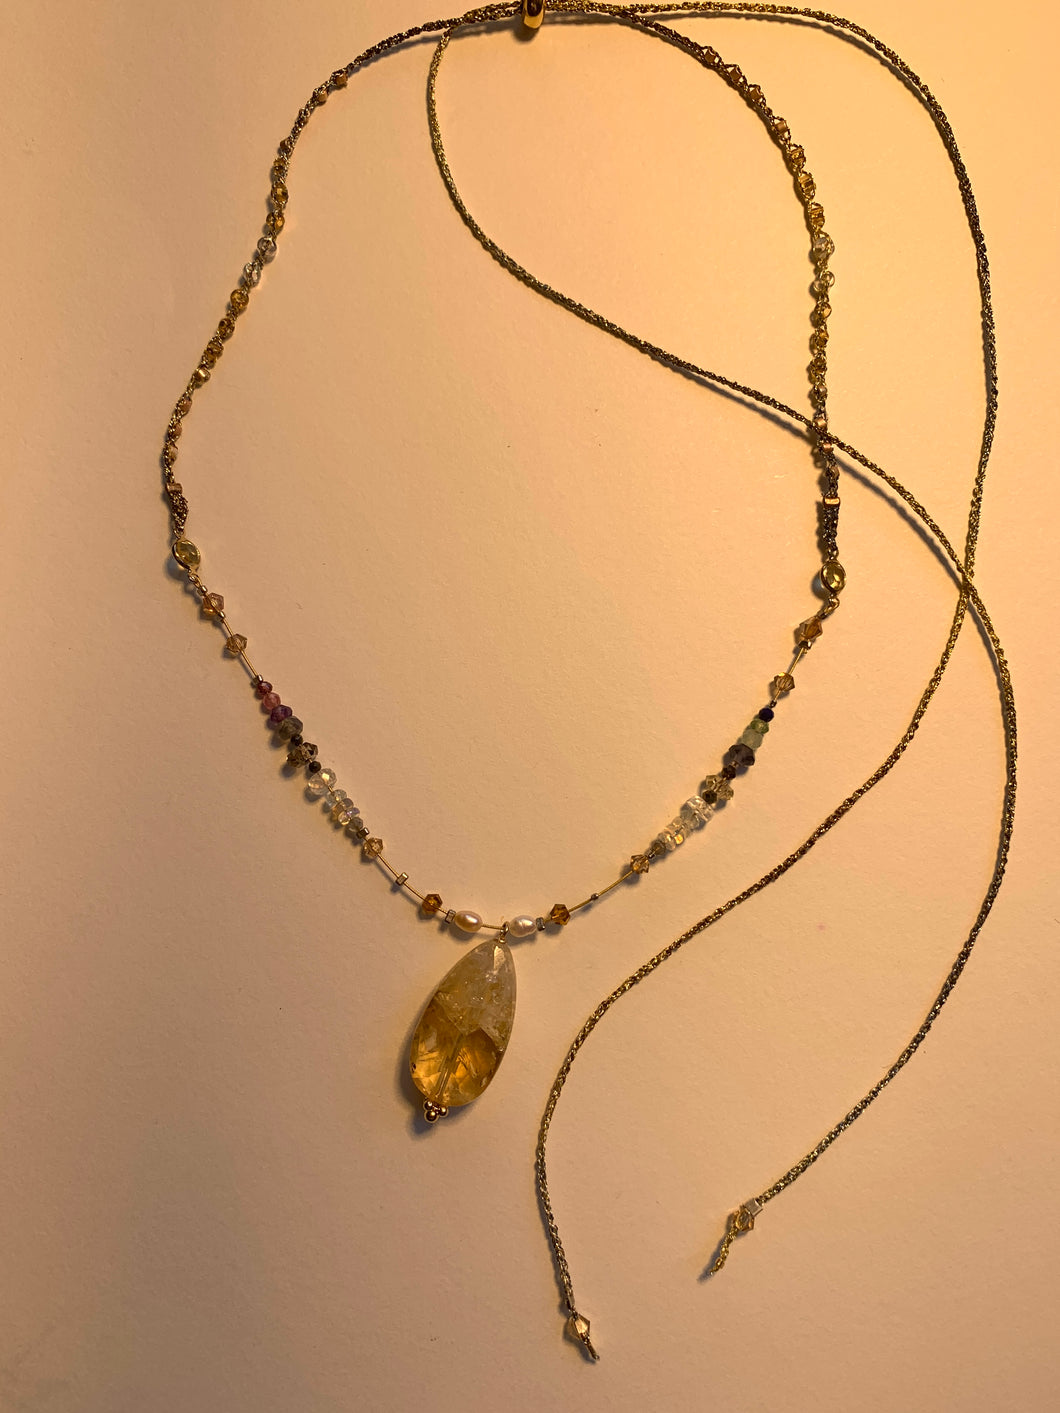 Adjustable necklace with Citrine